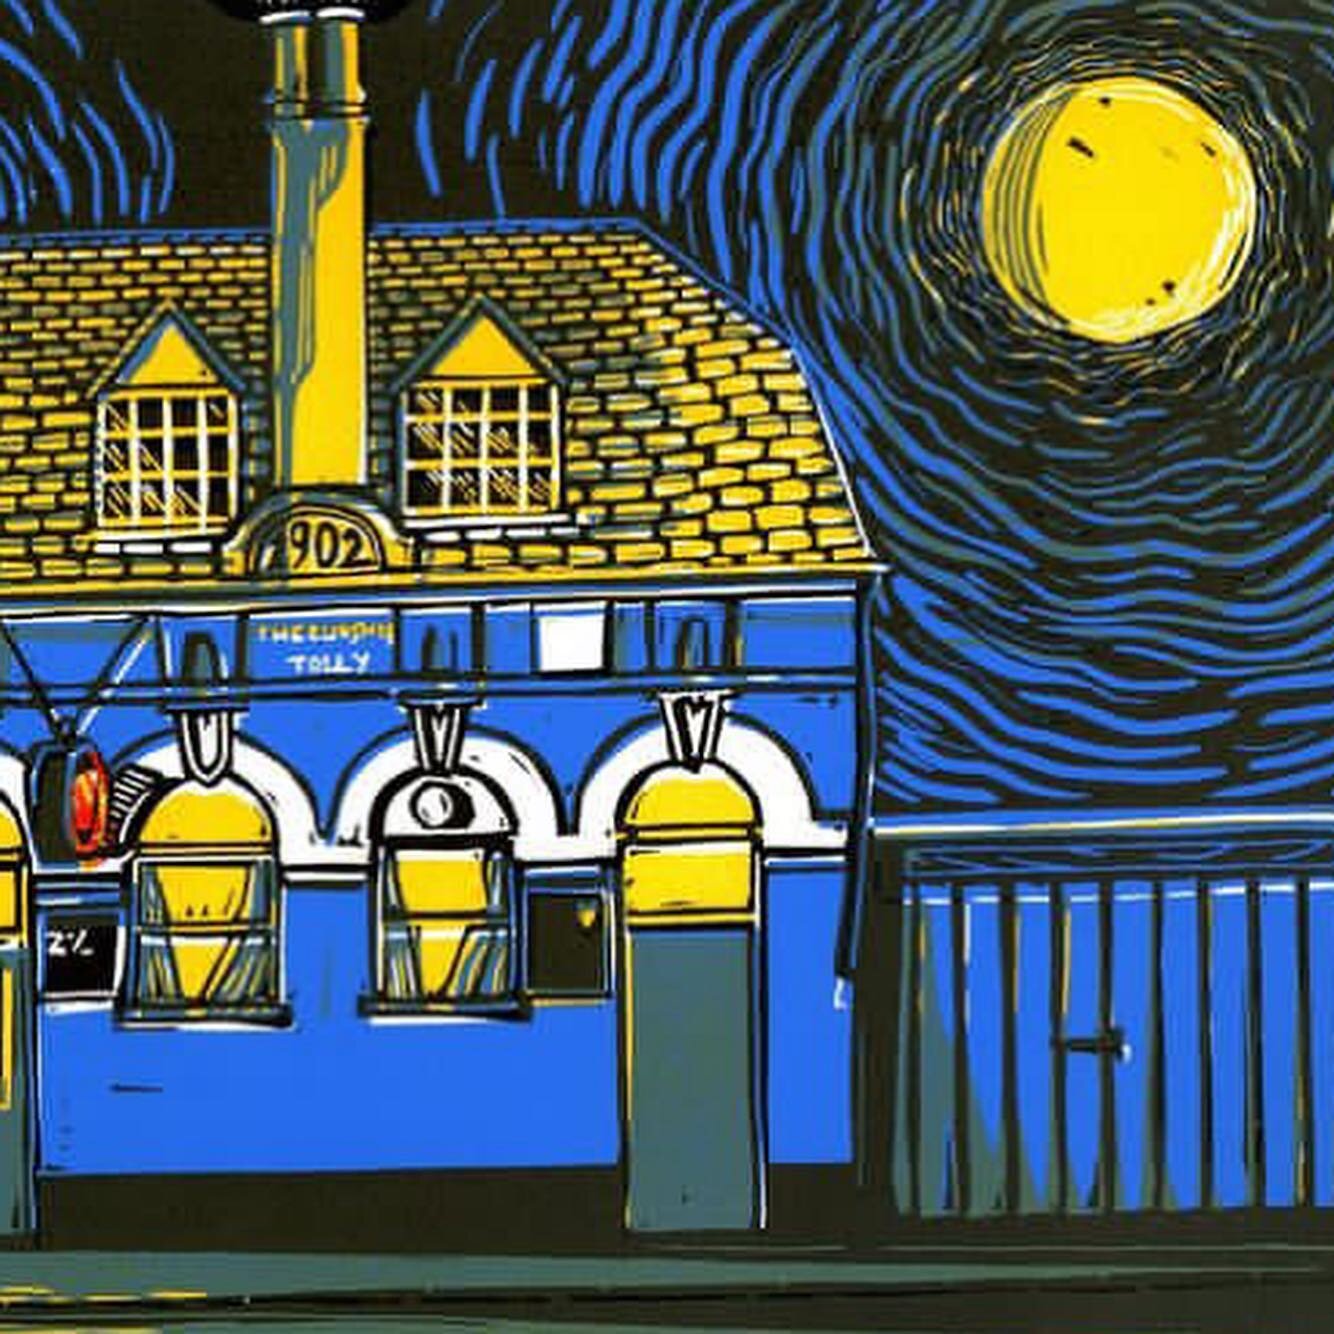 Topsham
Illustration and Print Fair
Sunday 11 September
10.30 - 4.00pm
Matthews Hall, Topsham, Devon

Exhibitor no 18
Simon Bor

We&rsquo;re thrilled to welcome Simon Bor to the Fair and his amazing linocuts. His series of lost music venues and the a